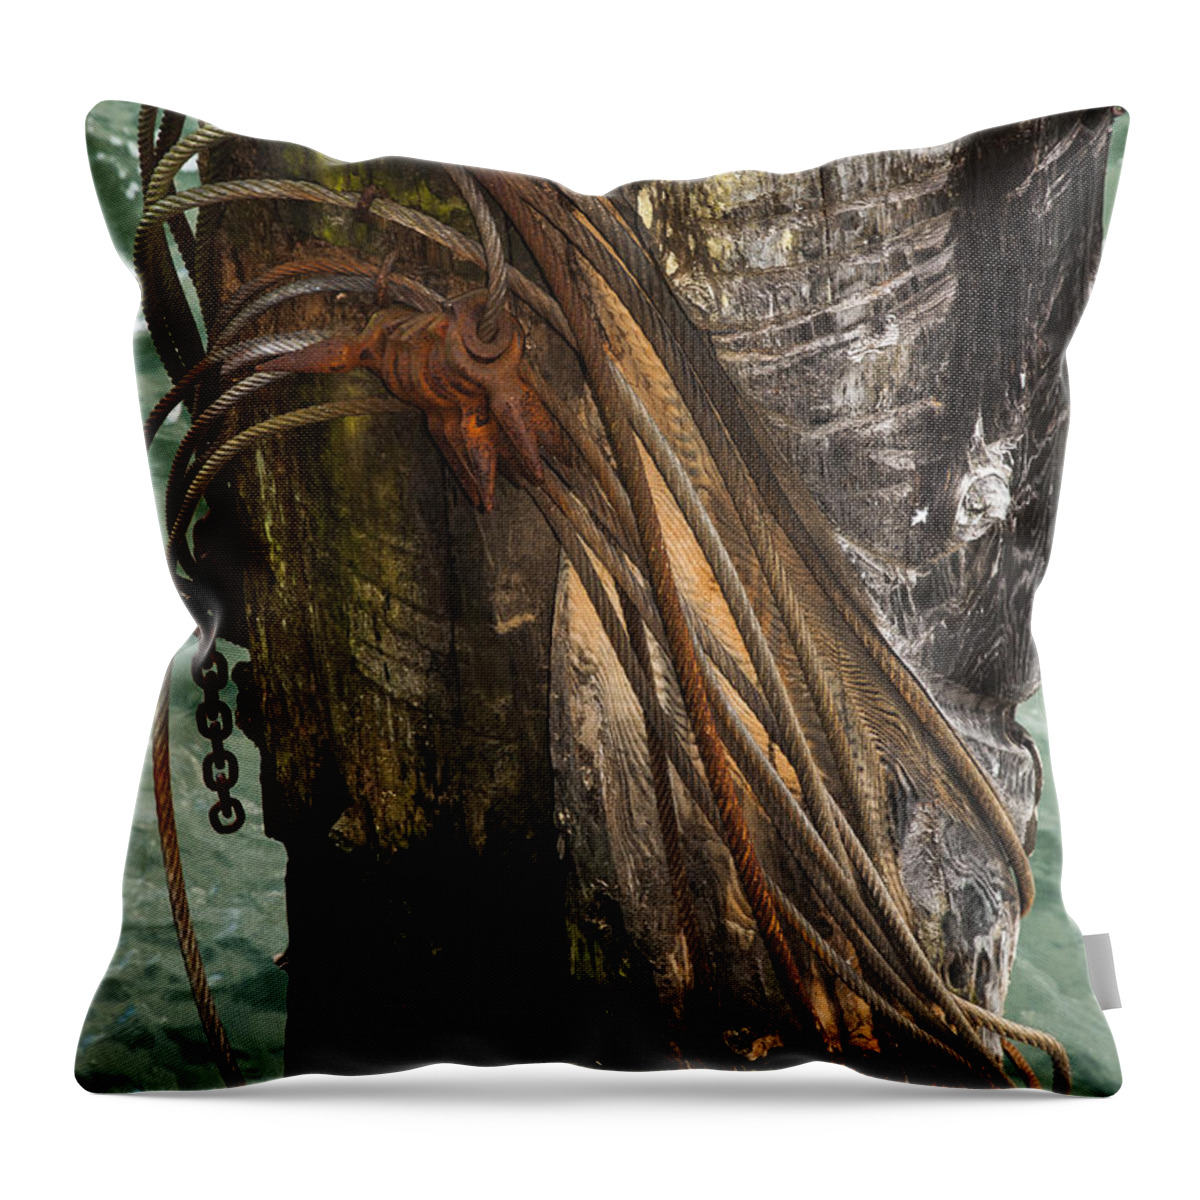 Pilings Throw Pillow featuring the photograph Burnt Pilings by Robert Potts